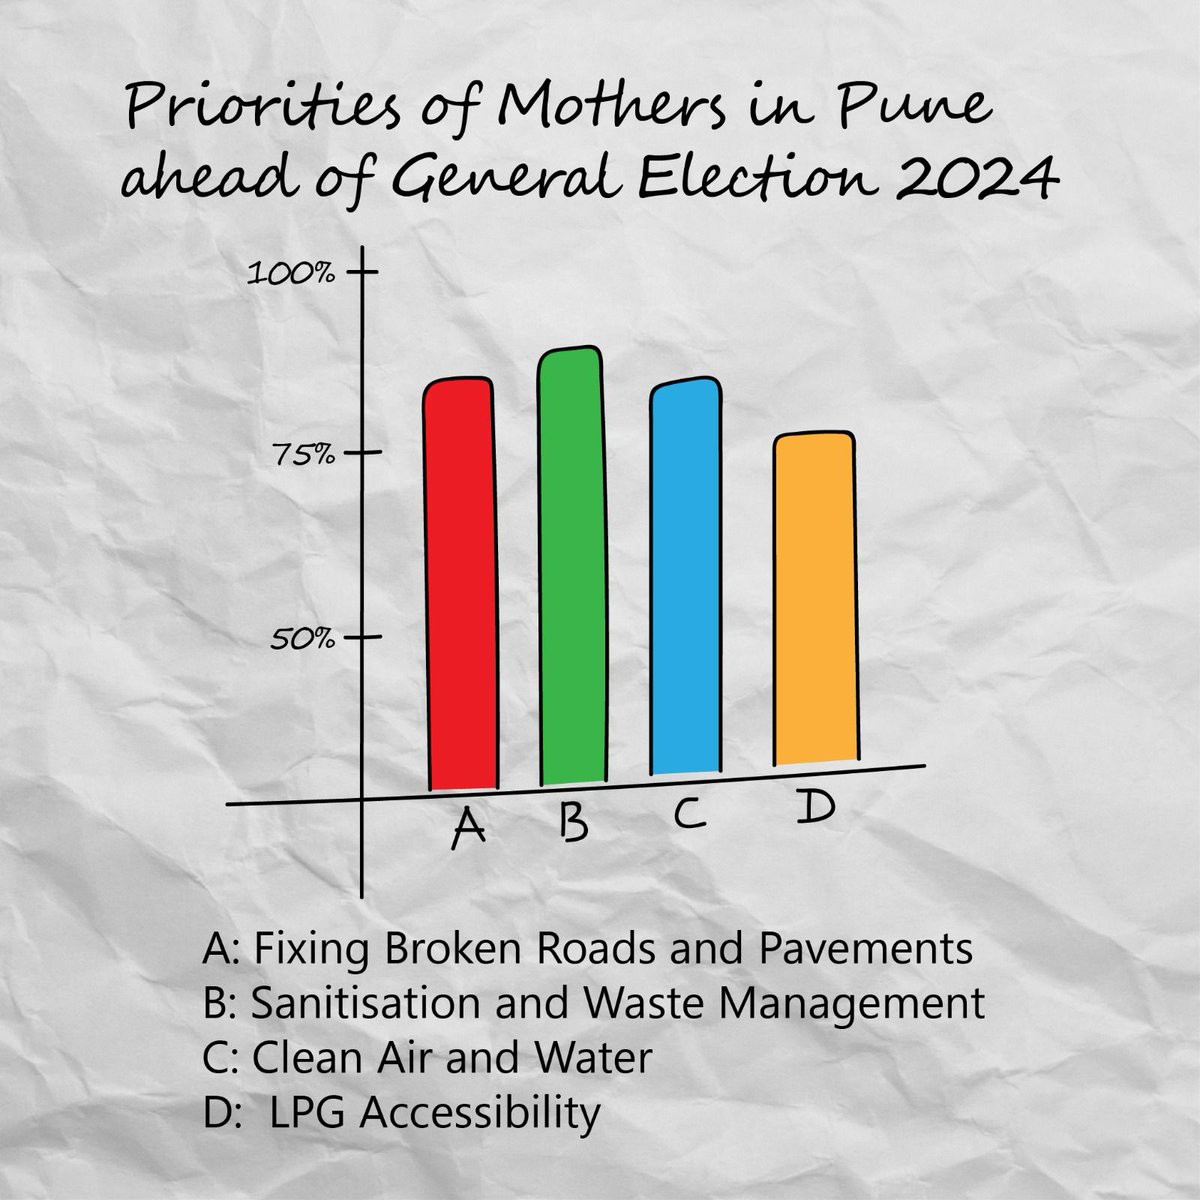 Survey by Warrior Moms, highlights that #Pune need quick fixes for roads, improvement in sanitation/waste management, clean air/water quality, and reduced LPG costs. Survey: pdflink.to/b03ef62d/

#swachhawachunav #cleanairelections @Warriormomsin @BhavreenMK @mhemachari